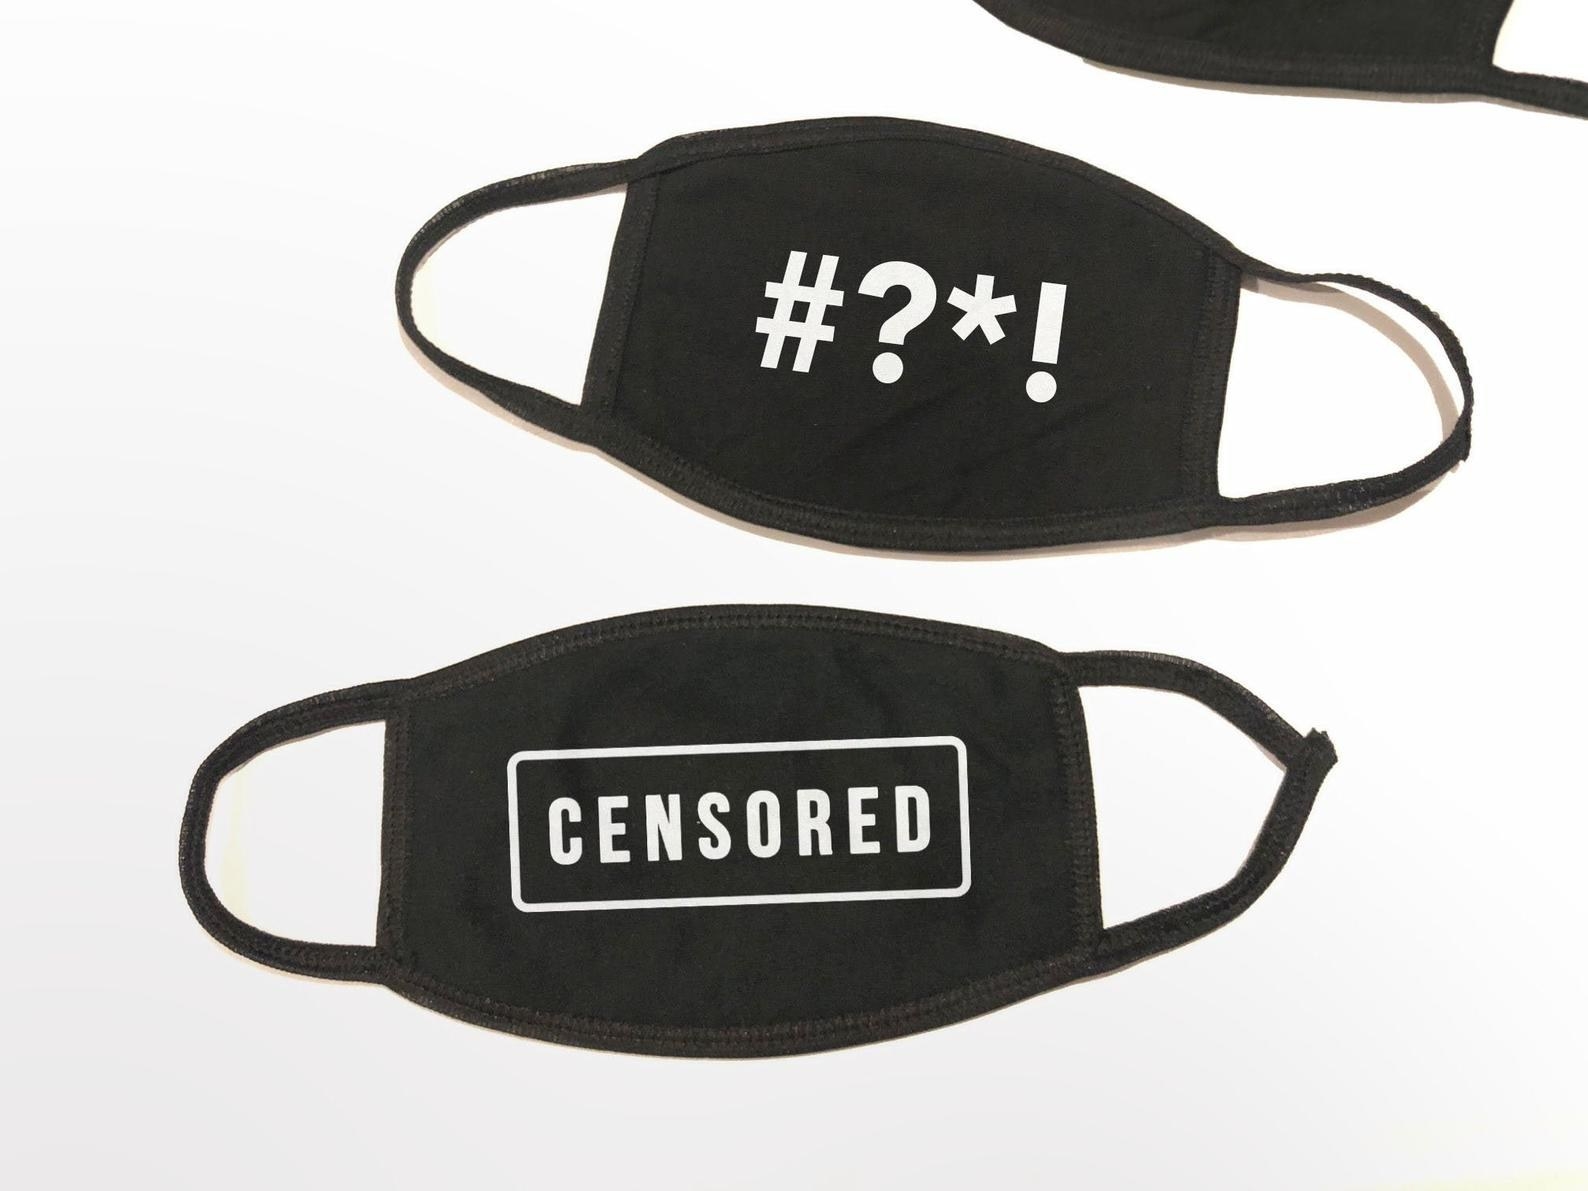 Two black masks, one that says CENSORED and another that says #?*! like a bleeped out swear word 